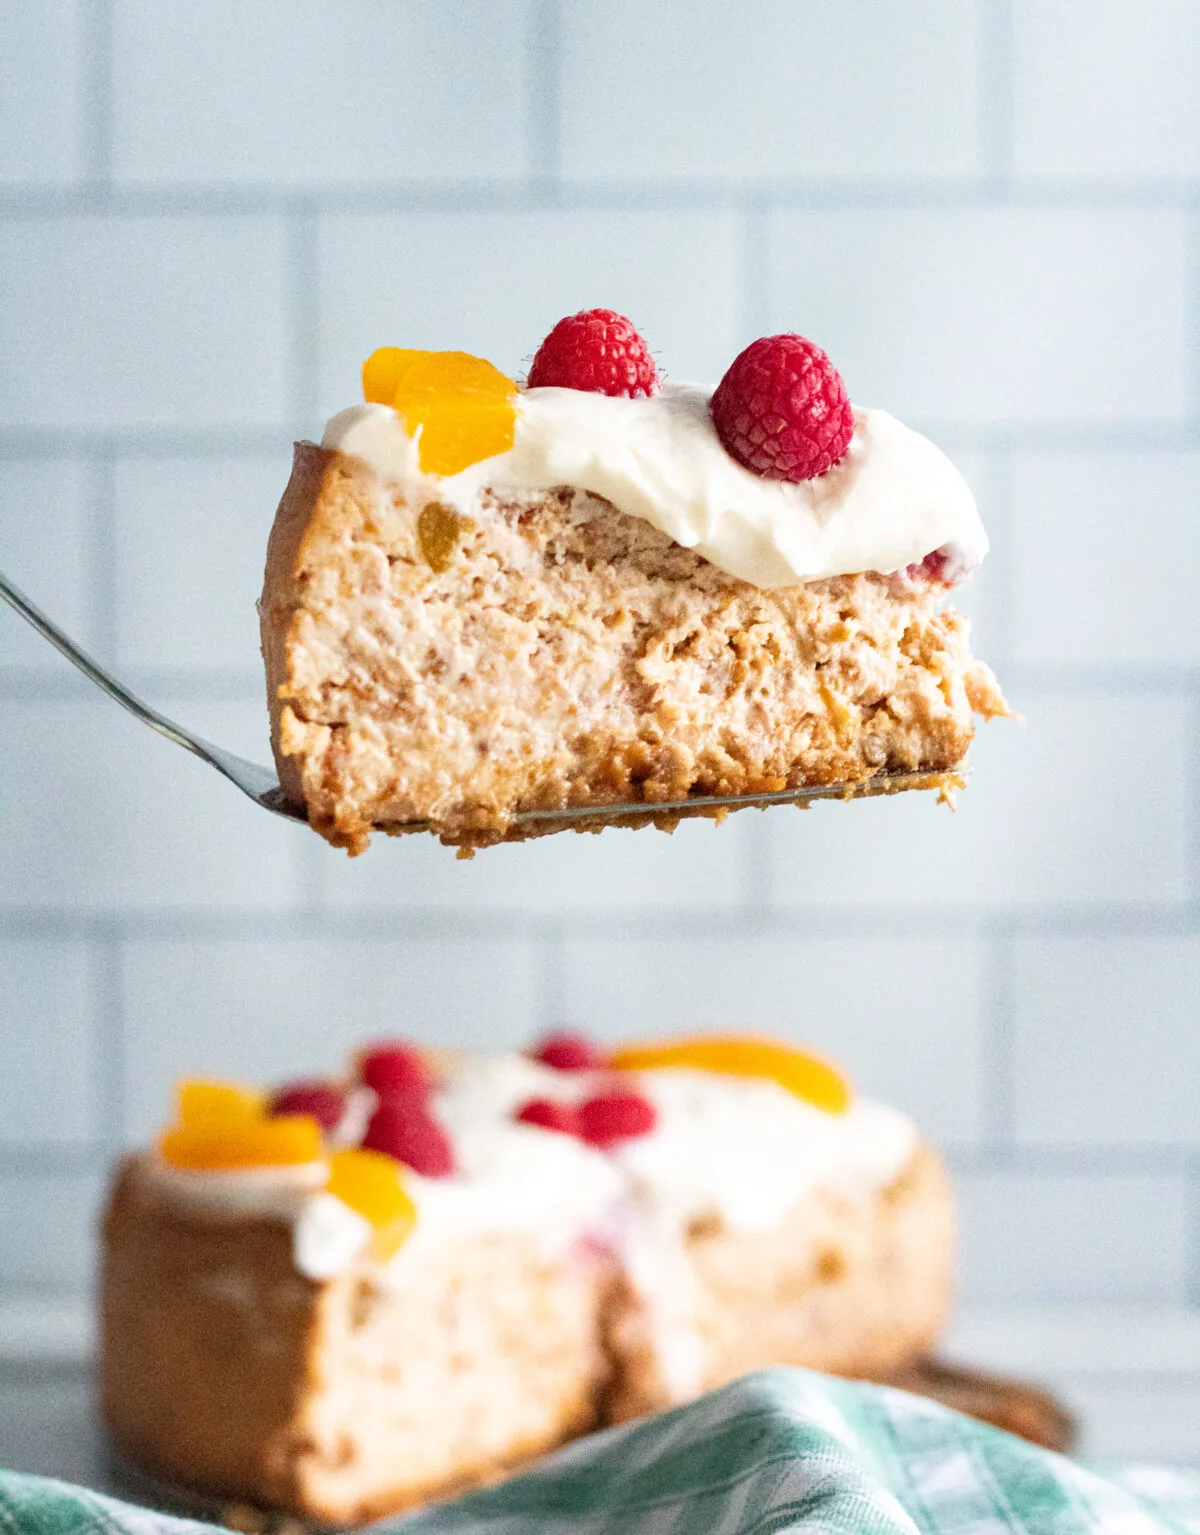 Sweet and creamy, this Instant Pot Peach Melba Cheesecake is filled with fresh peaches & raspberries then topped with a cream cheese frosting.